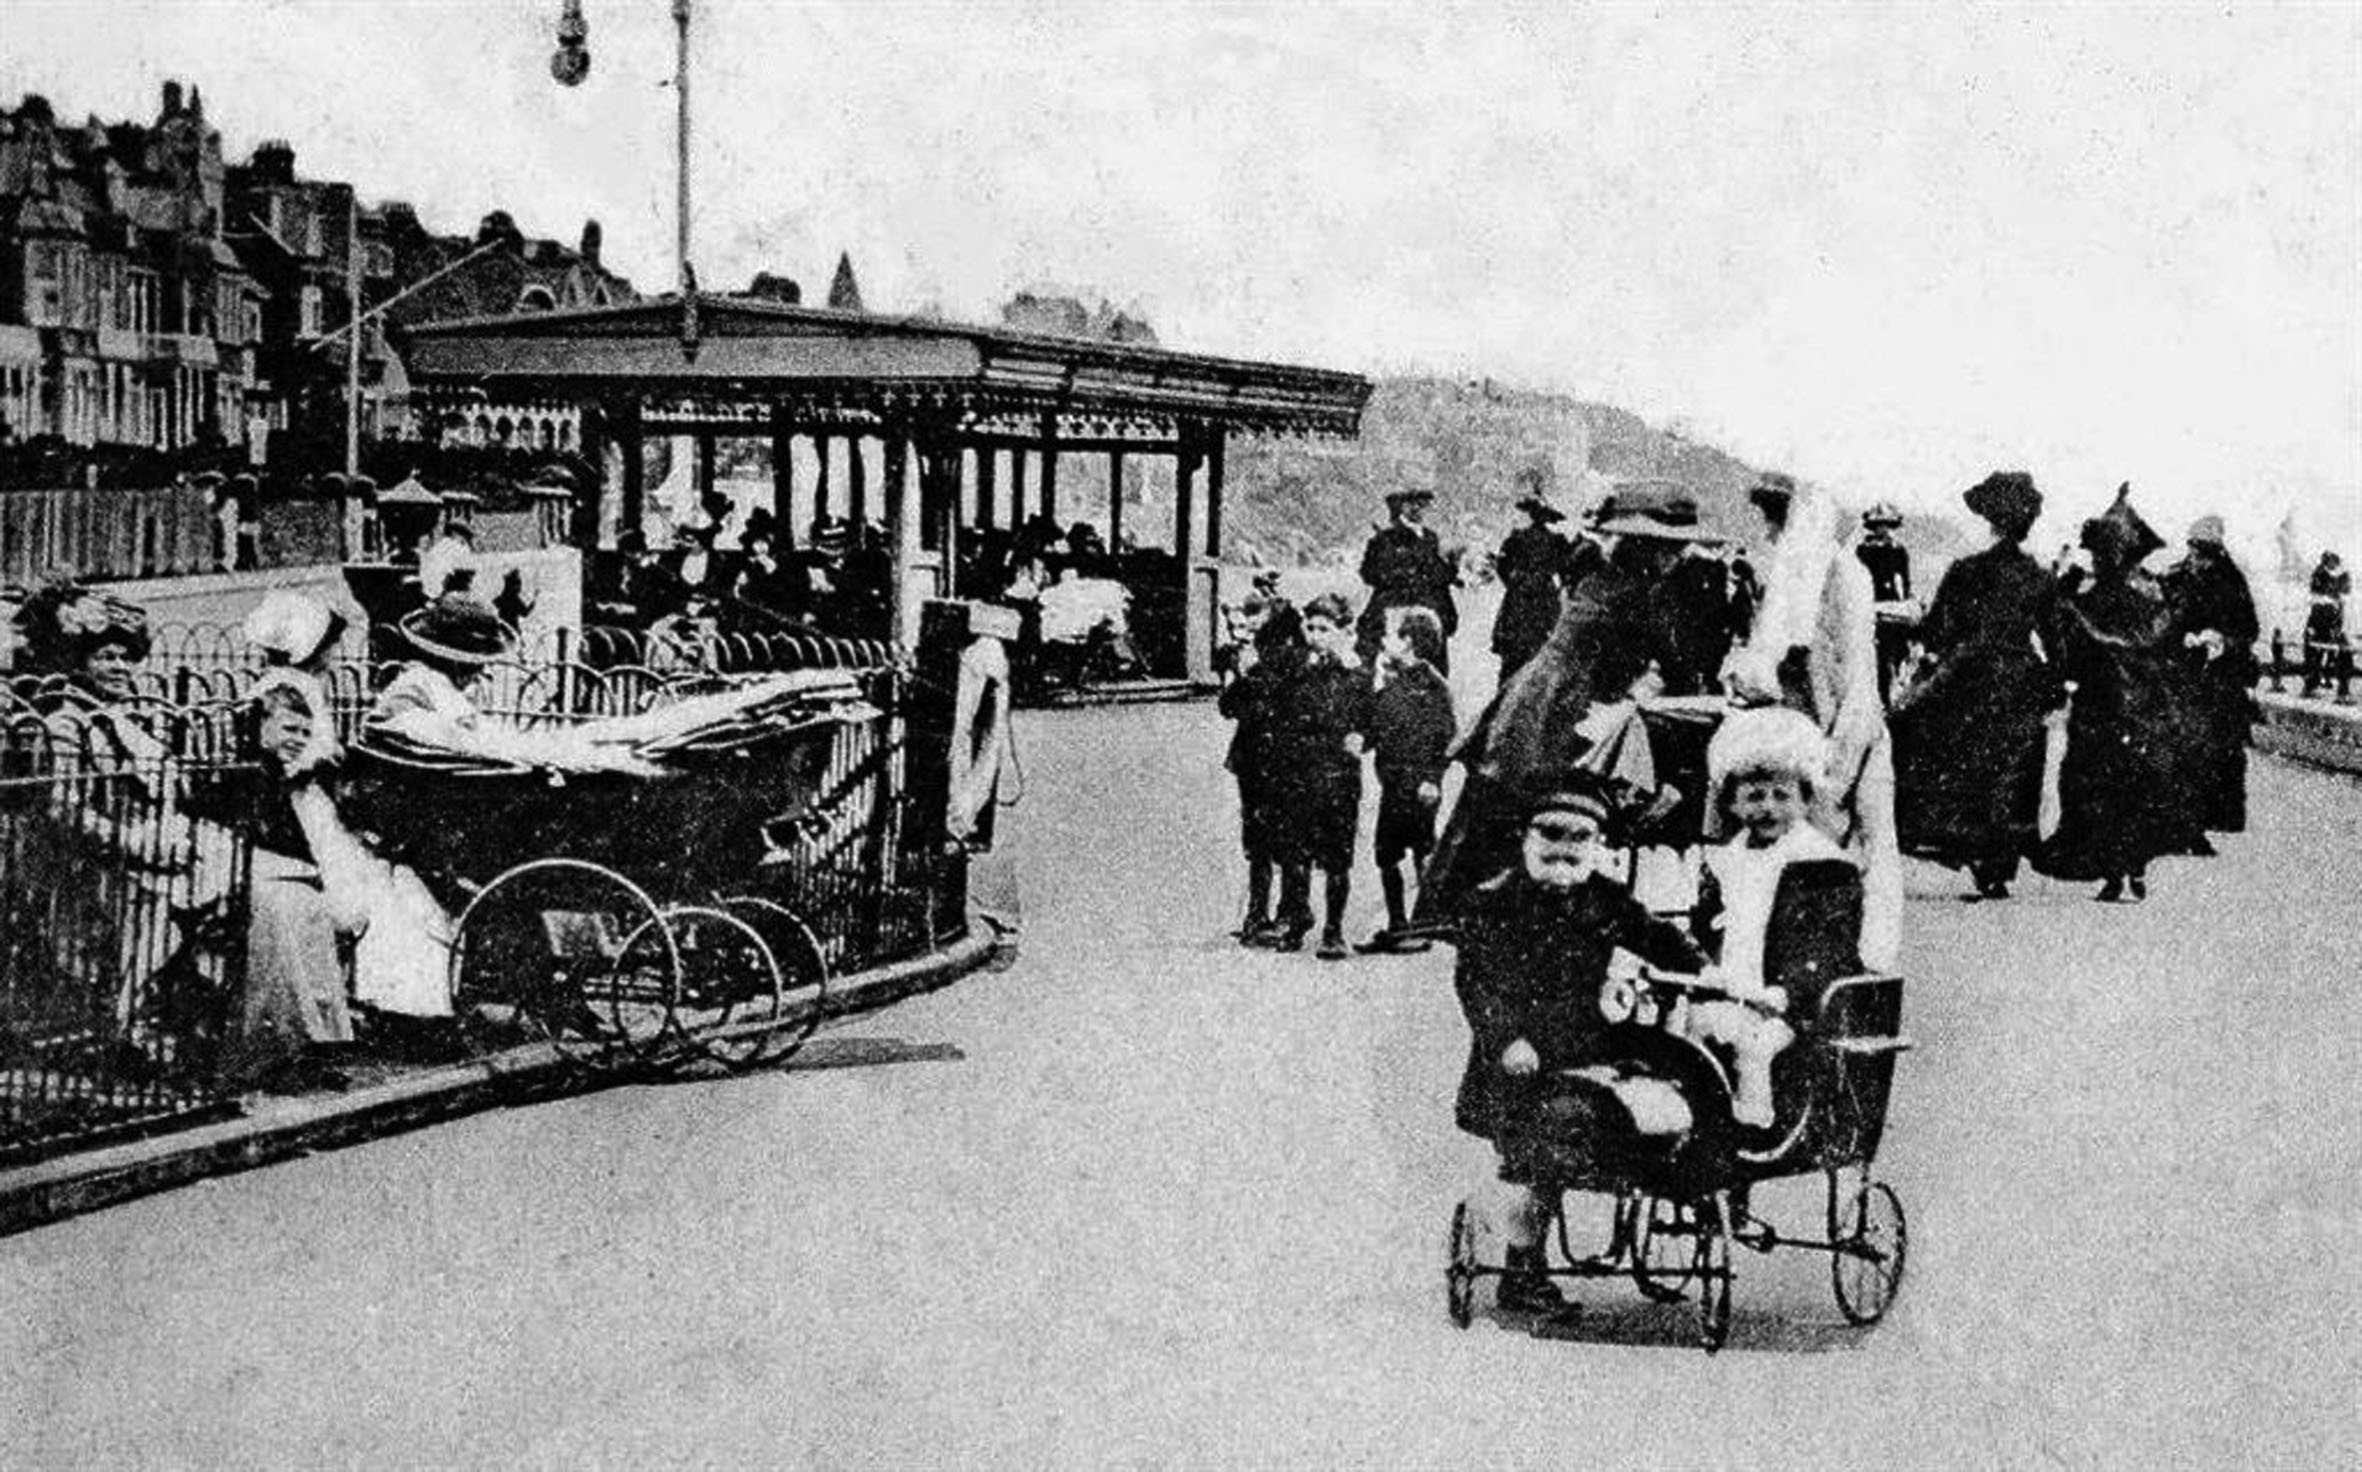 Busy - the Thorpe Bay tram shelter in the 1900s